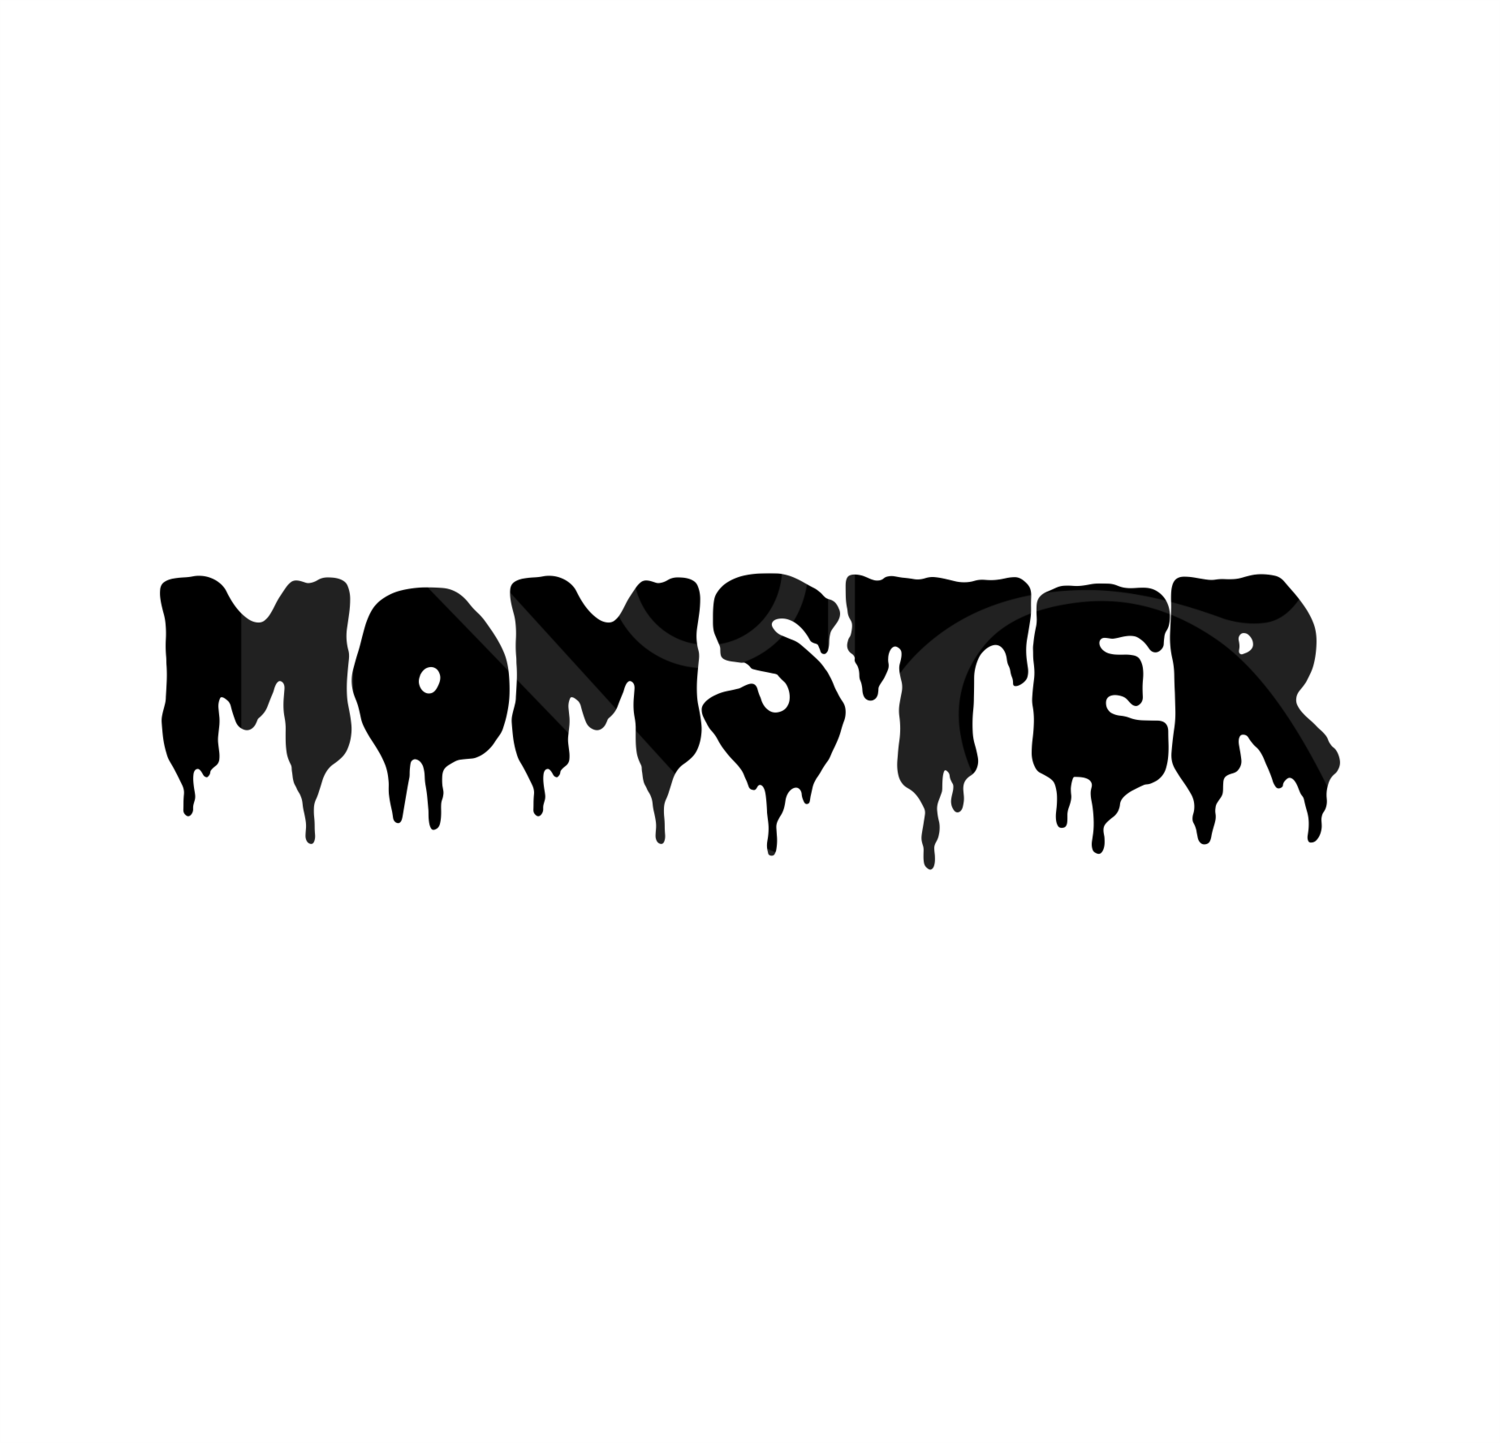 Momster SVG File, Halloween Shirt Svg, Cut File for Cricut or Silhouette, Mom Halloween Monster, Pdf, DXF, PNG, Instant Download